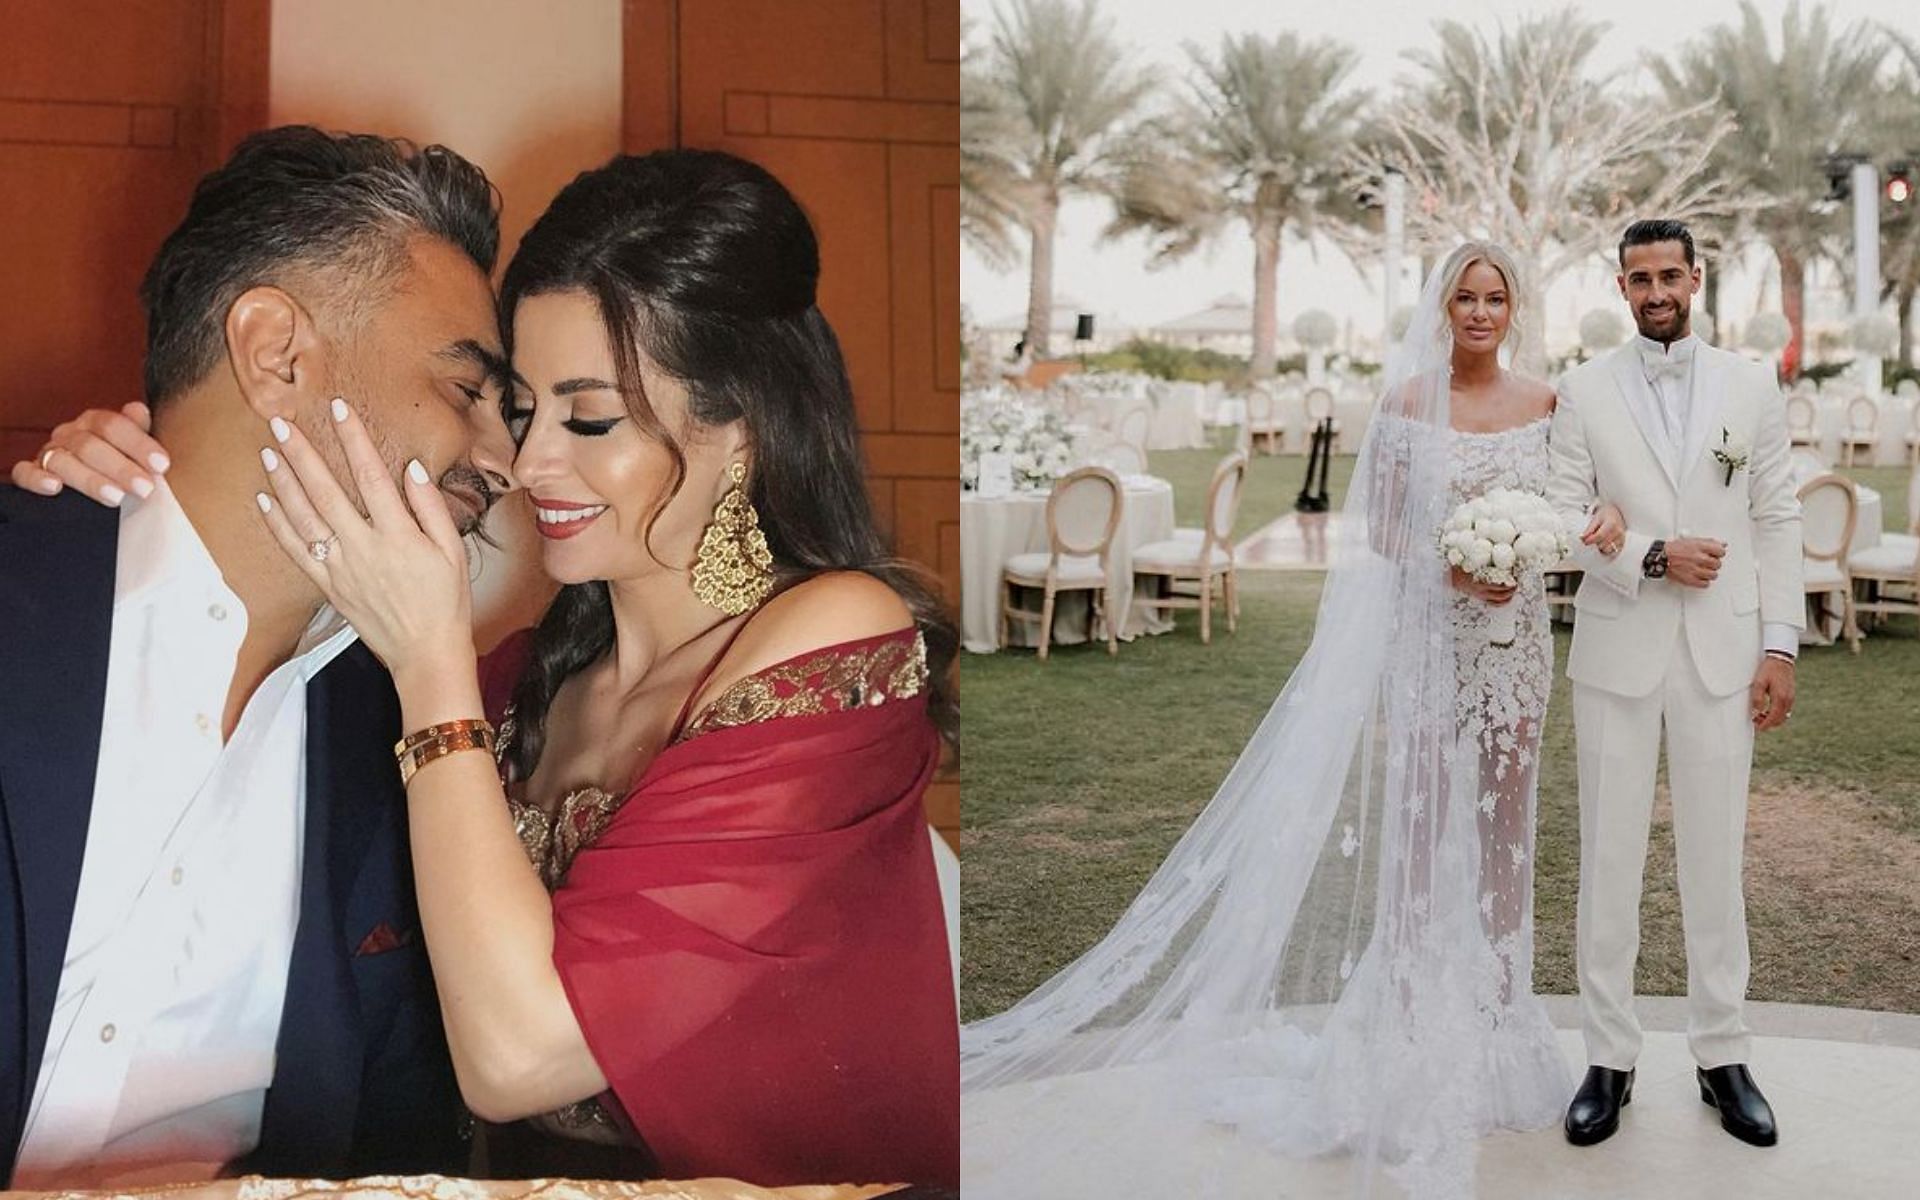 The Real Housewives of Dubai&#039;s cast with their husbands: Nina Ali and Munaf Ali [on the left] and Caroline Stanbury and Sergio Carrallo [on the right] (Images via sergiocarrallo and nina.ali/Instagram)